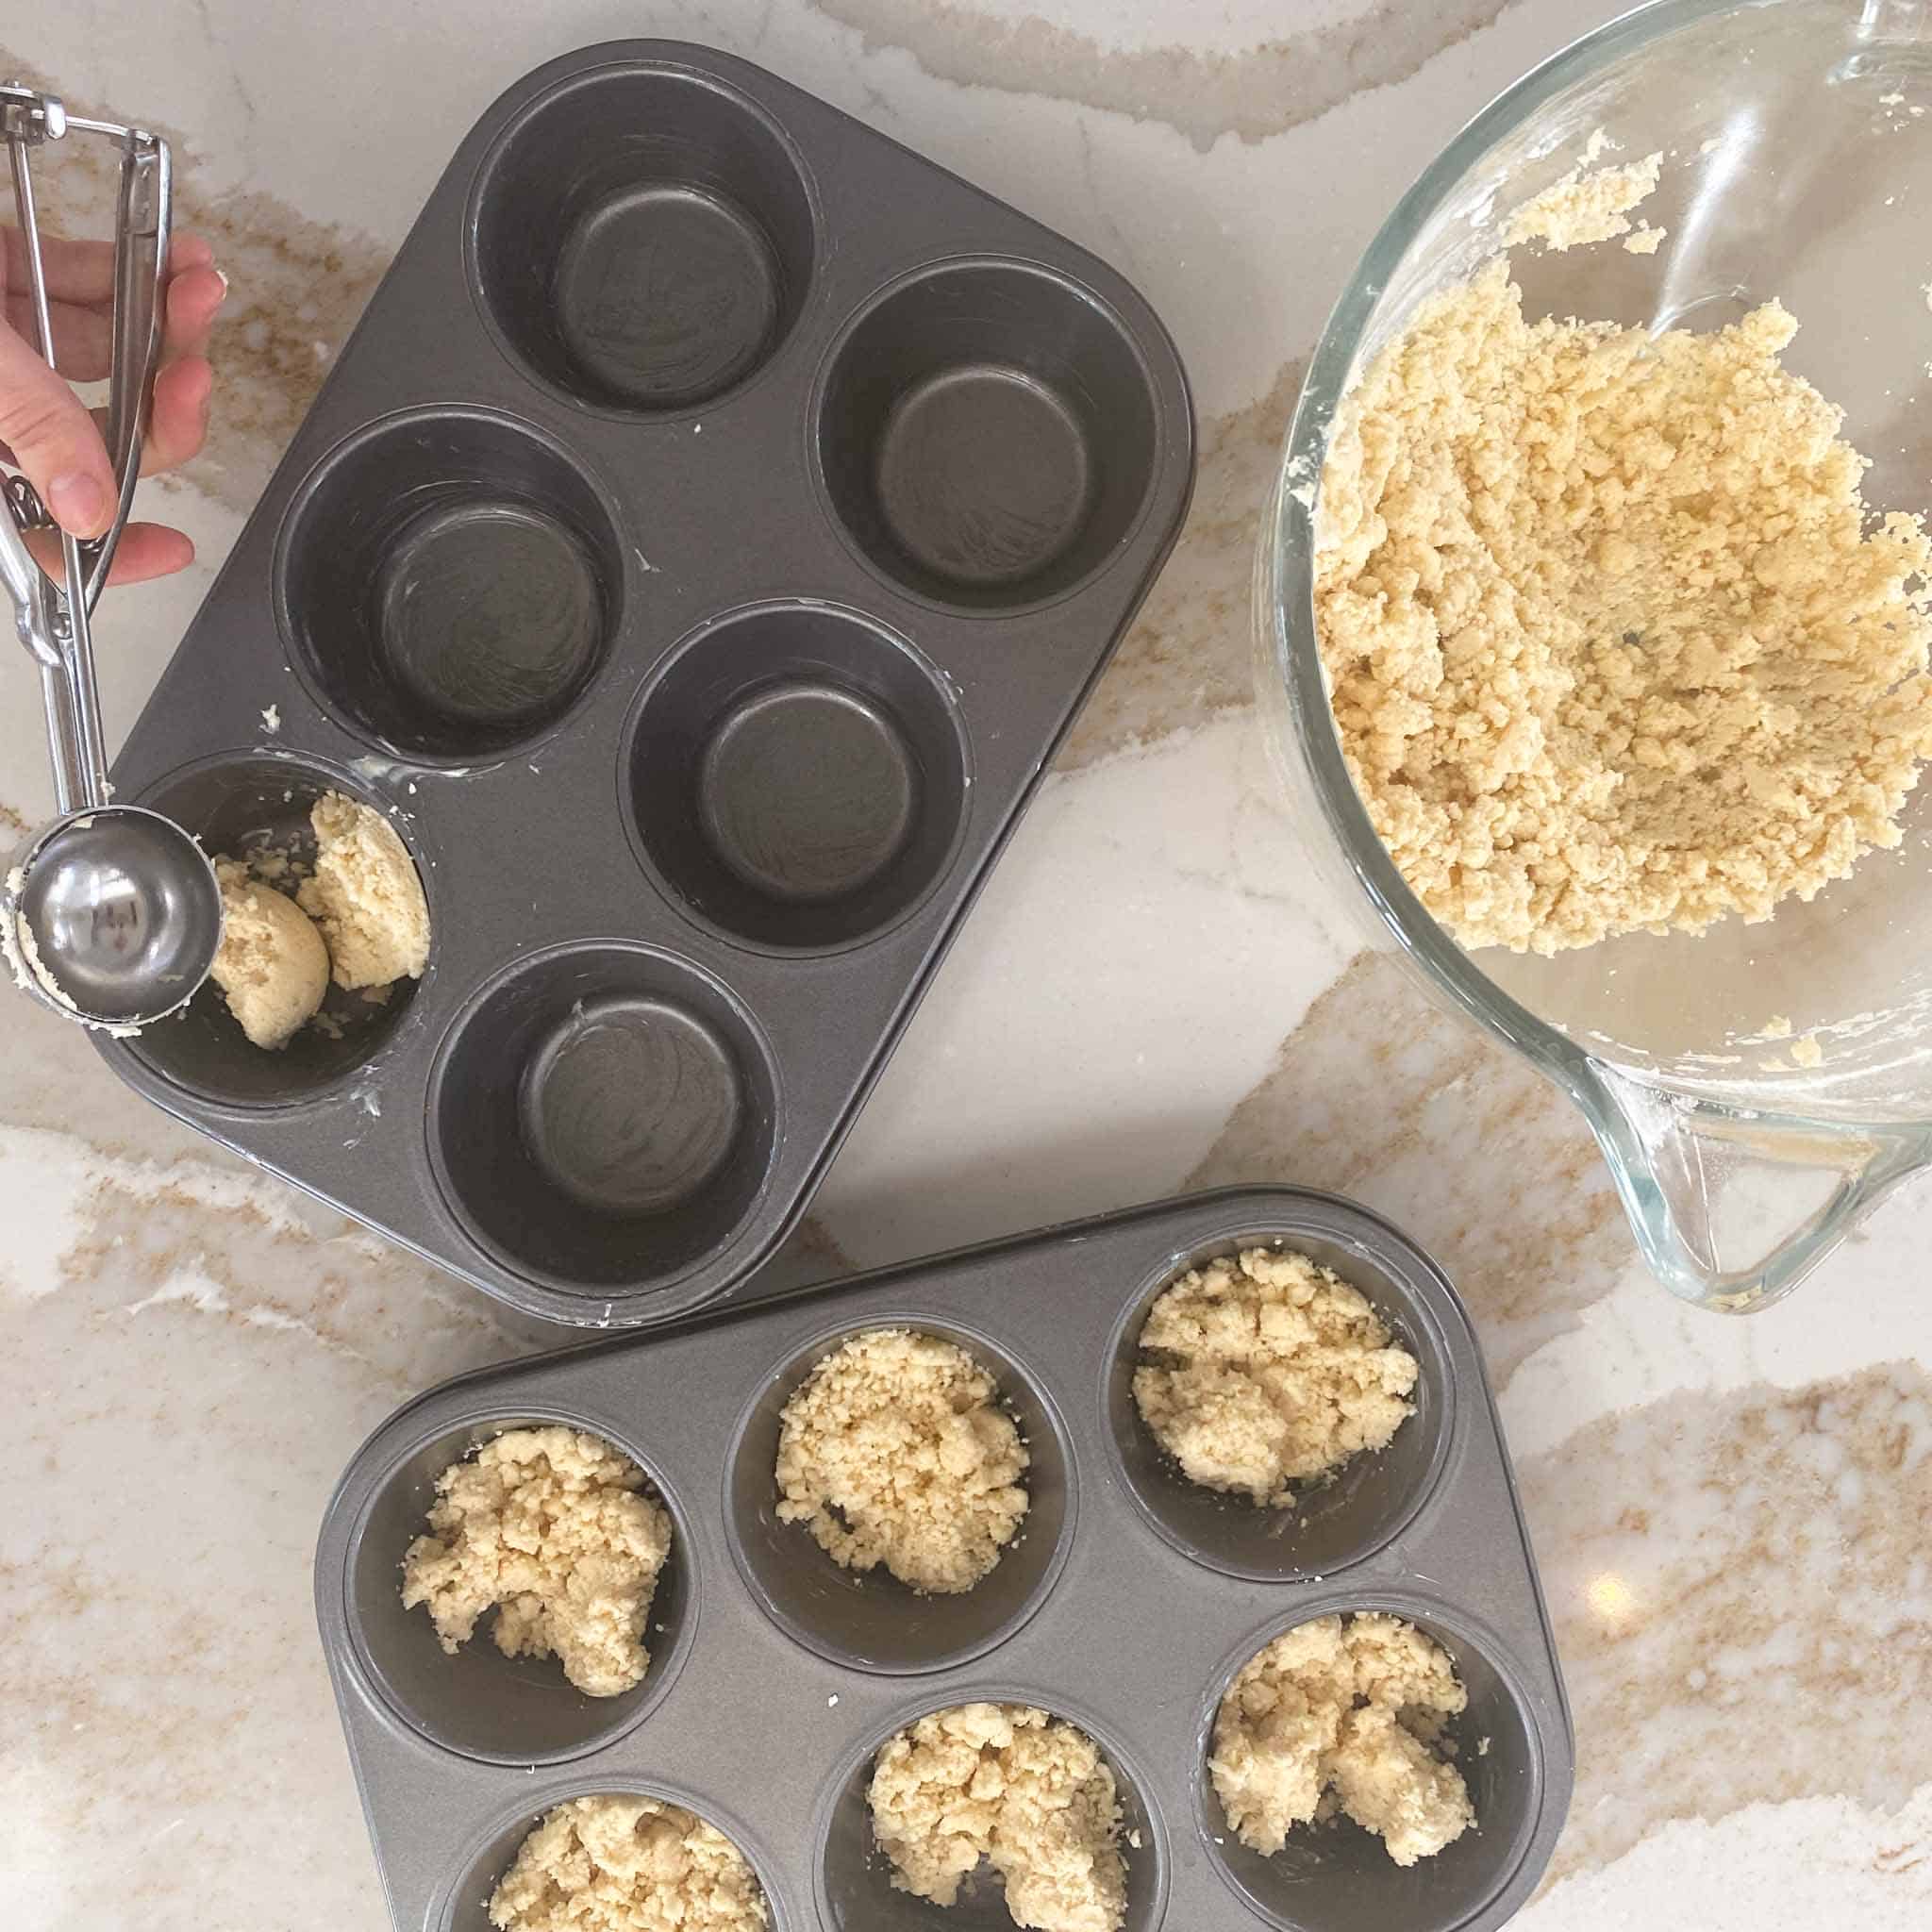 crumble base being spooned into jumbo muffin tins.